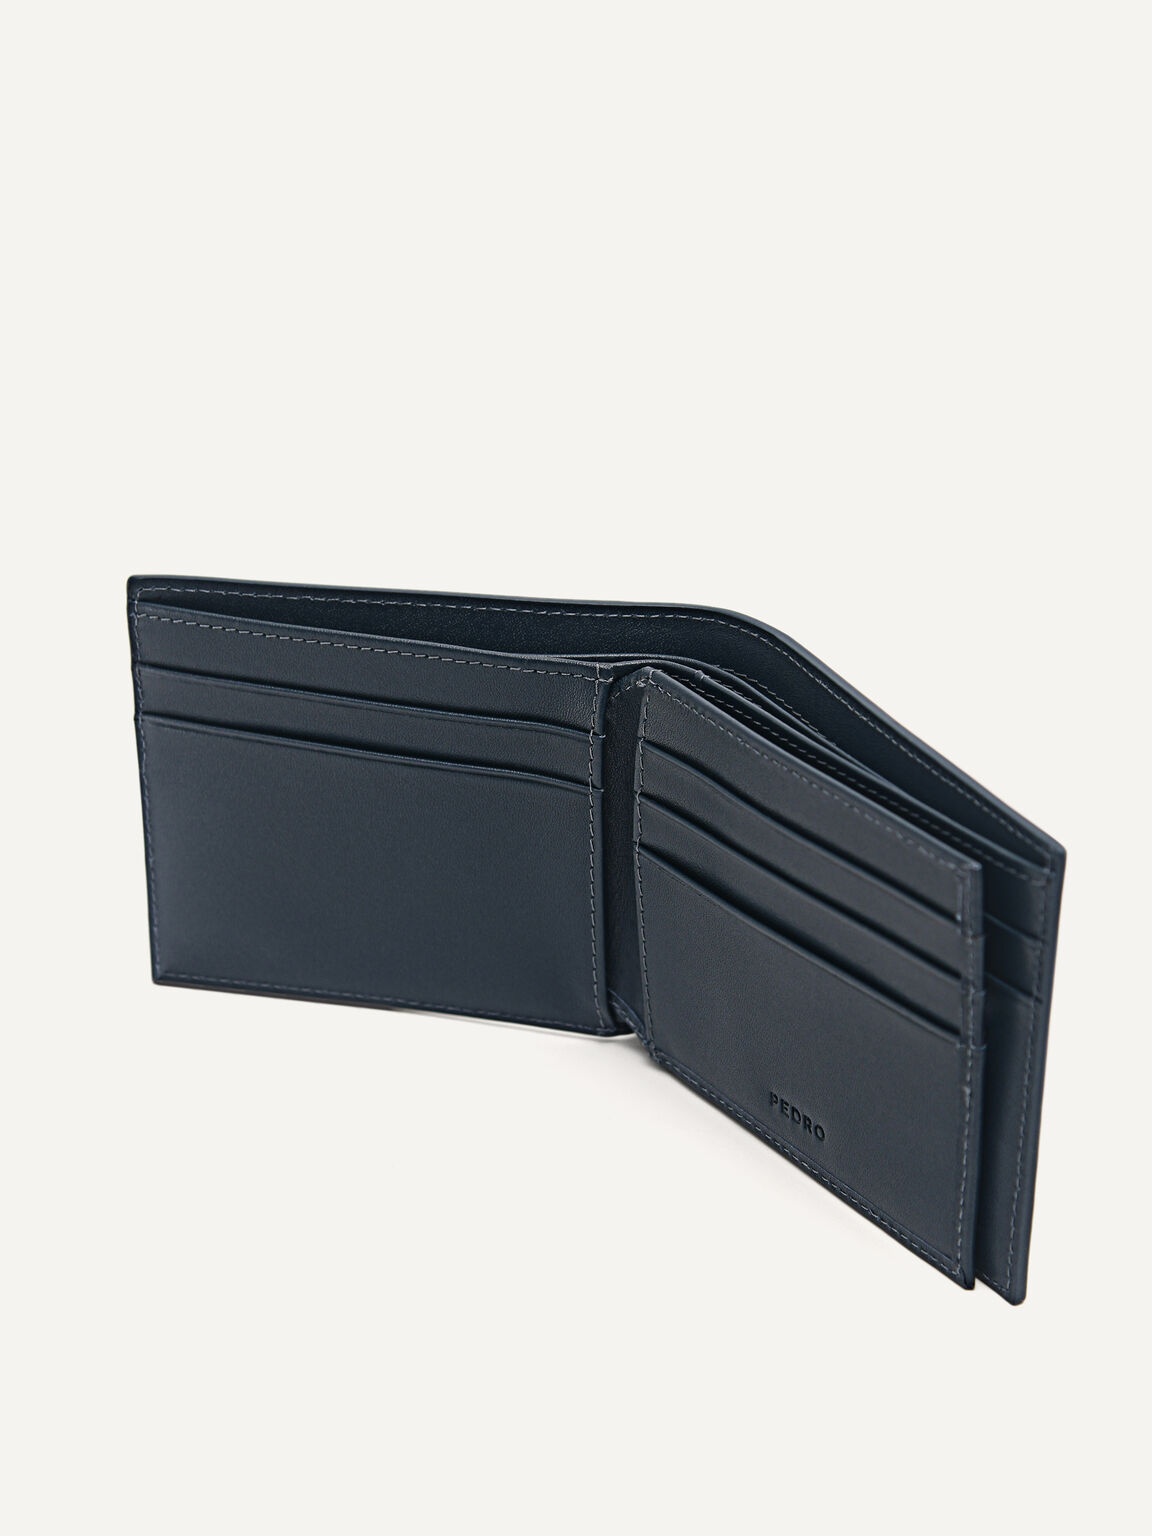 Leather Wallet, Navy